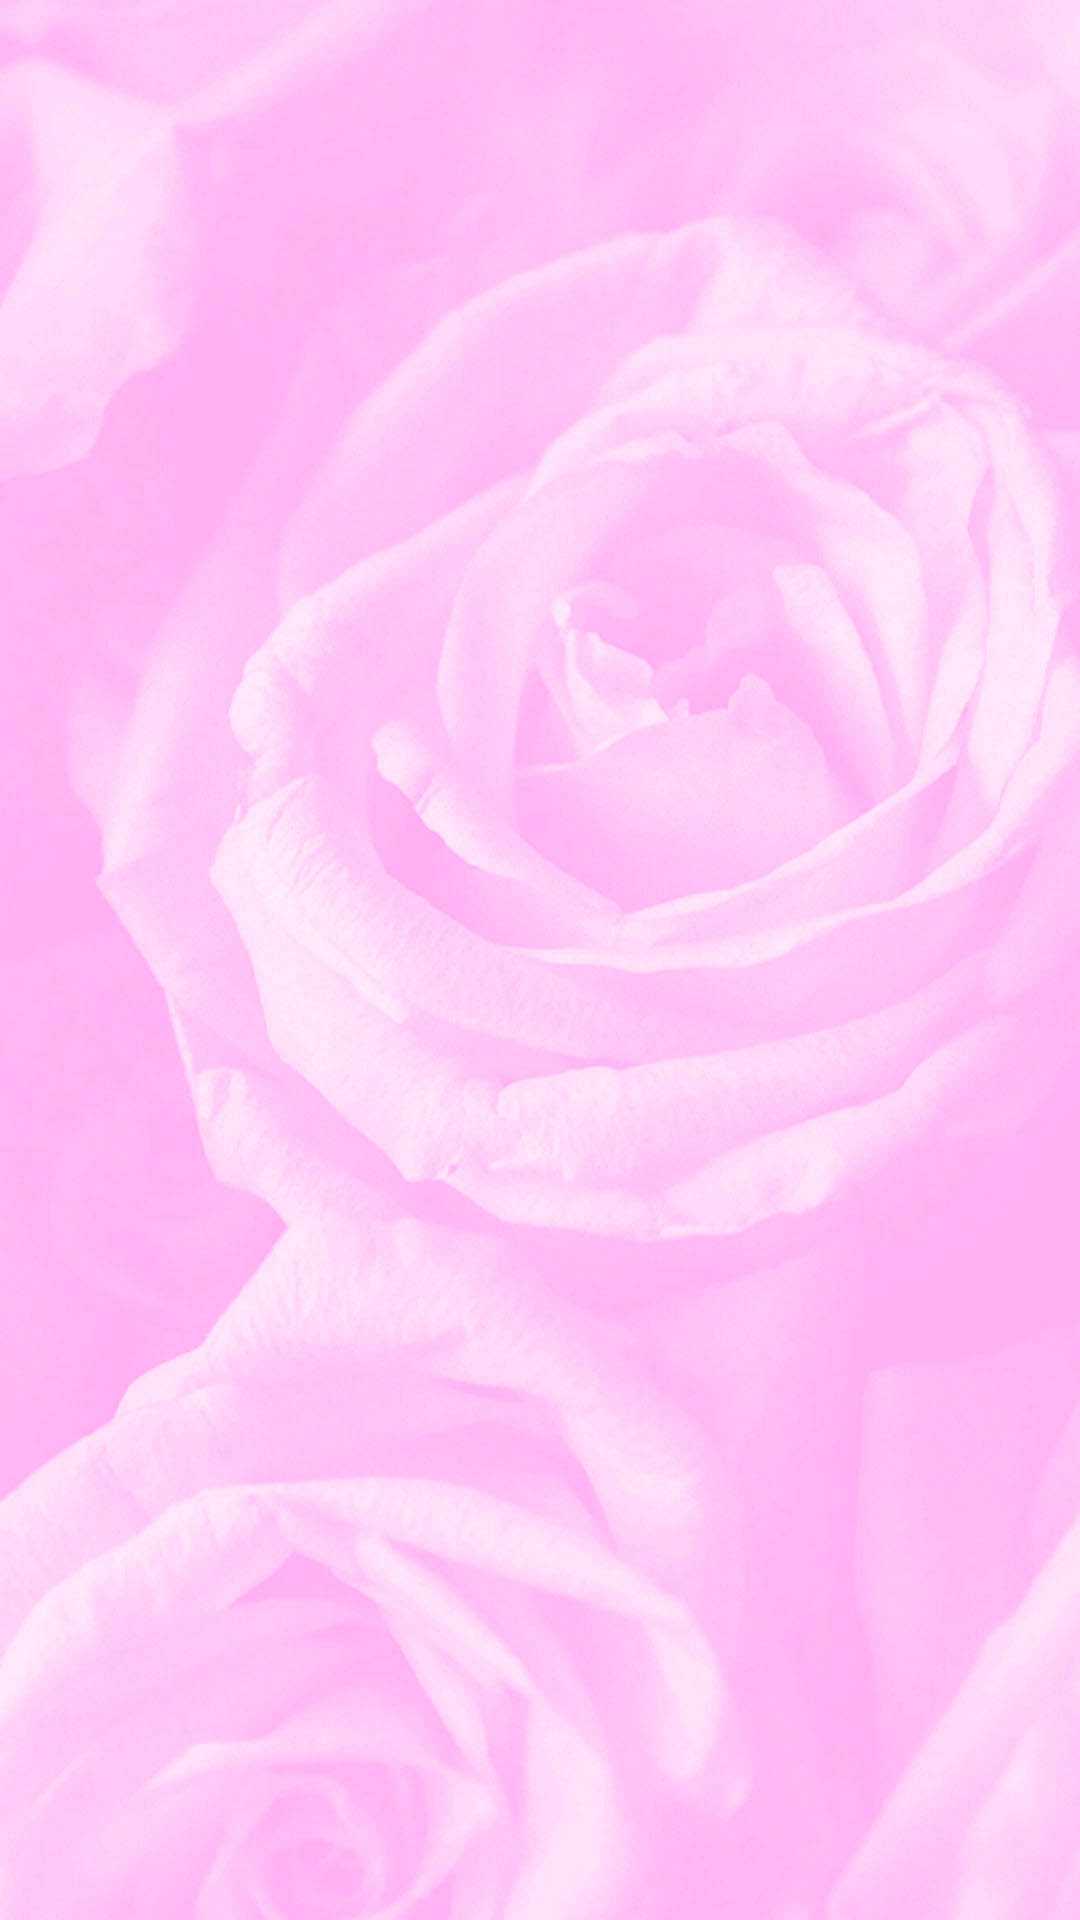 IPhone wallpaper with beautiful flowers, pink roses, iPhone 6 plus wallpaper, iPhone 6 wallpaper, pretty iPhone wallpaper, rose wallpaper, iPhone 6 wallpaper, iPhone 5 wallpaper, iPhone 4 wallpaper, rose iPhone wallpaper, pink wallpaper, girly wallpaper, iPhone wallpaper, iPhone background, iPhone home screen wallpaper, iPhone lock screen wallpaper, iPhone background, iPhone home screen background, iPhone lock screen background, girly iPhone wallpaper, girly iPhone background, girly iPhone home screen wallpaper, girly iPhone lock screen wallpaper, girly iPhone background, girly iPhone home screen background, girly iPhone lock screen background - Light pink, soft pink